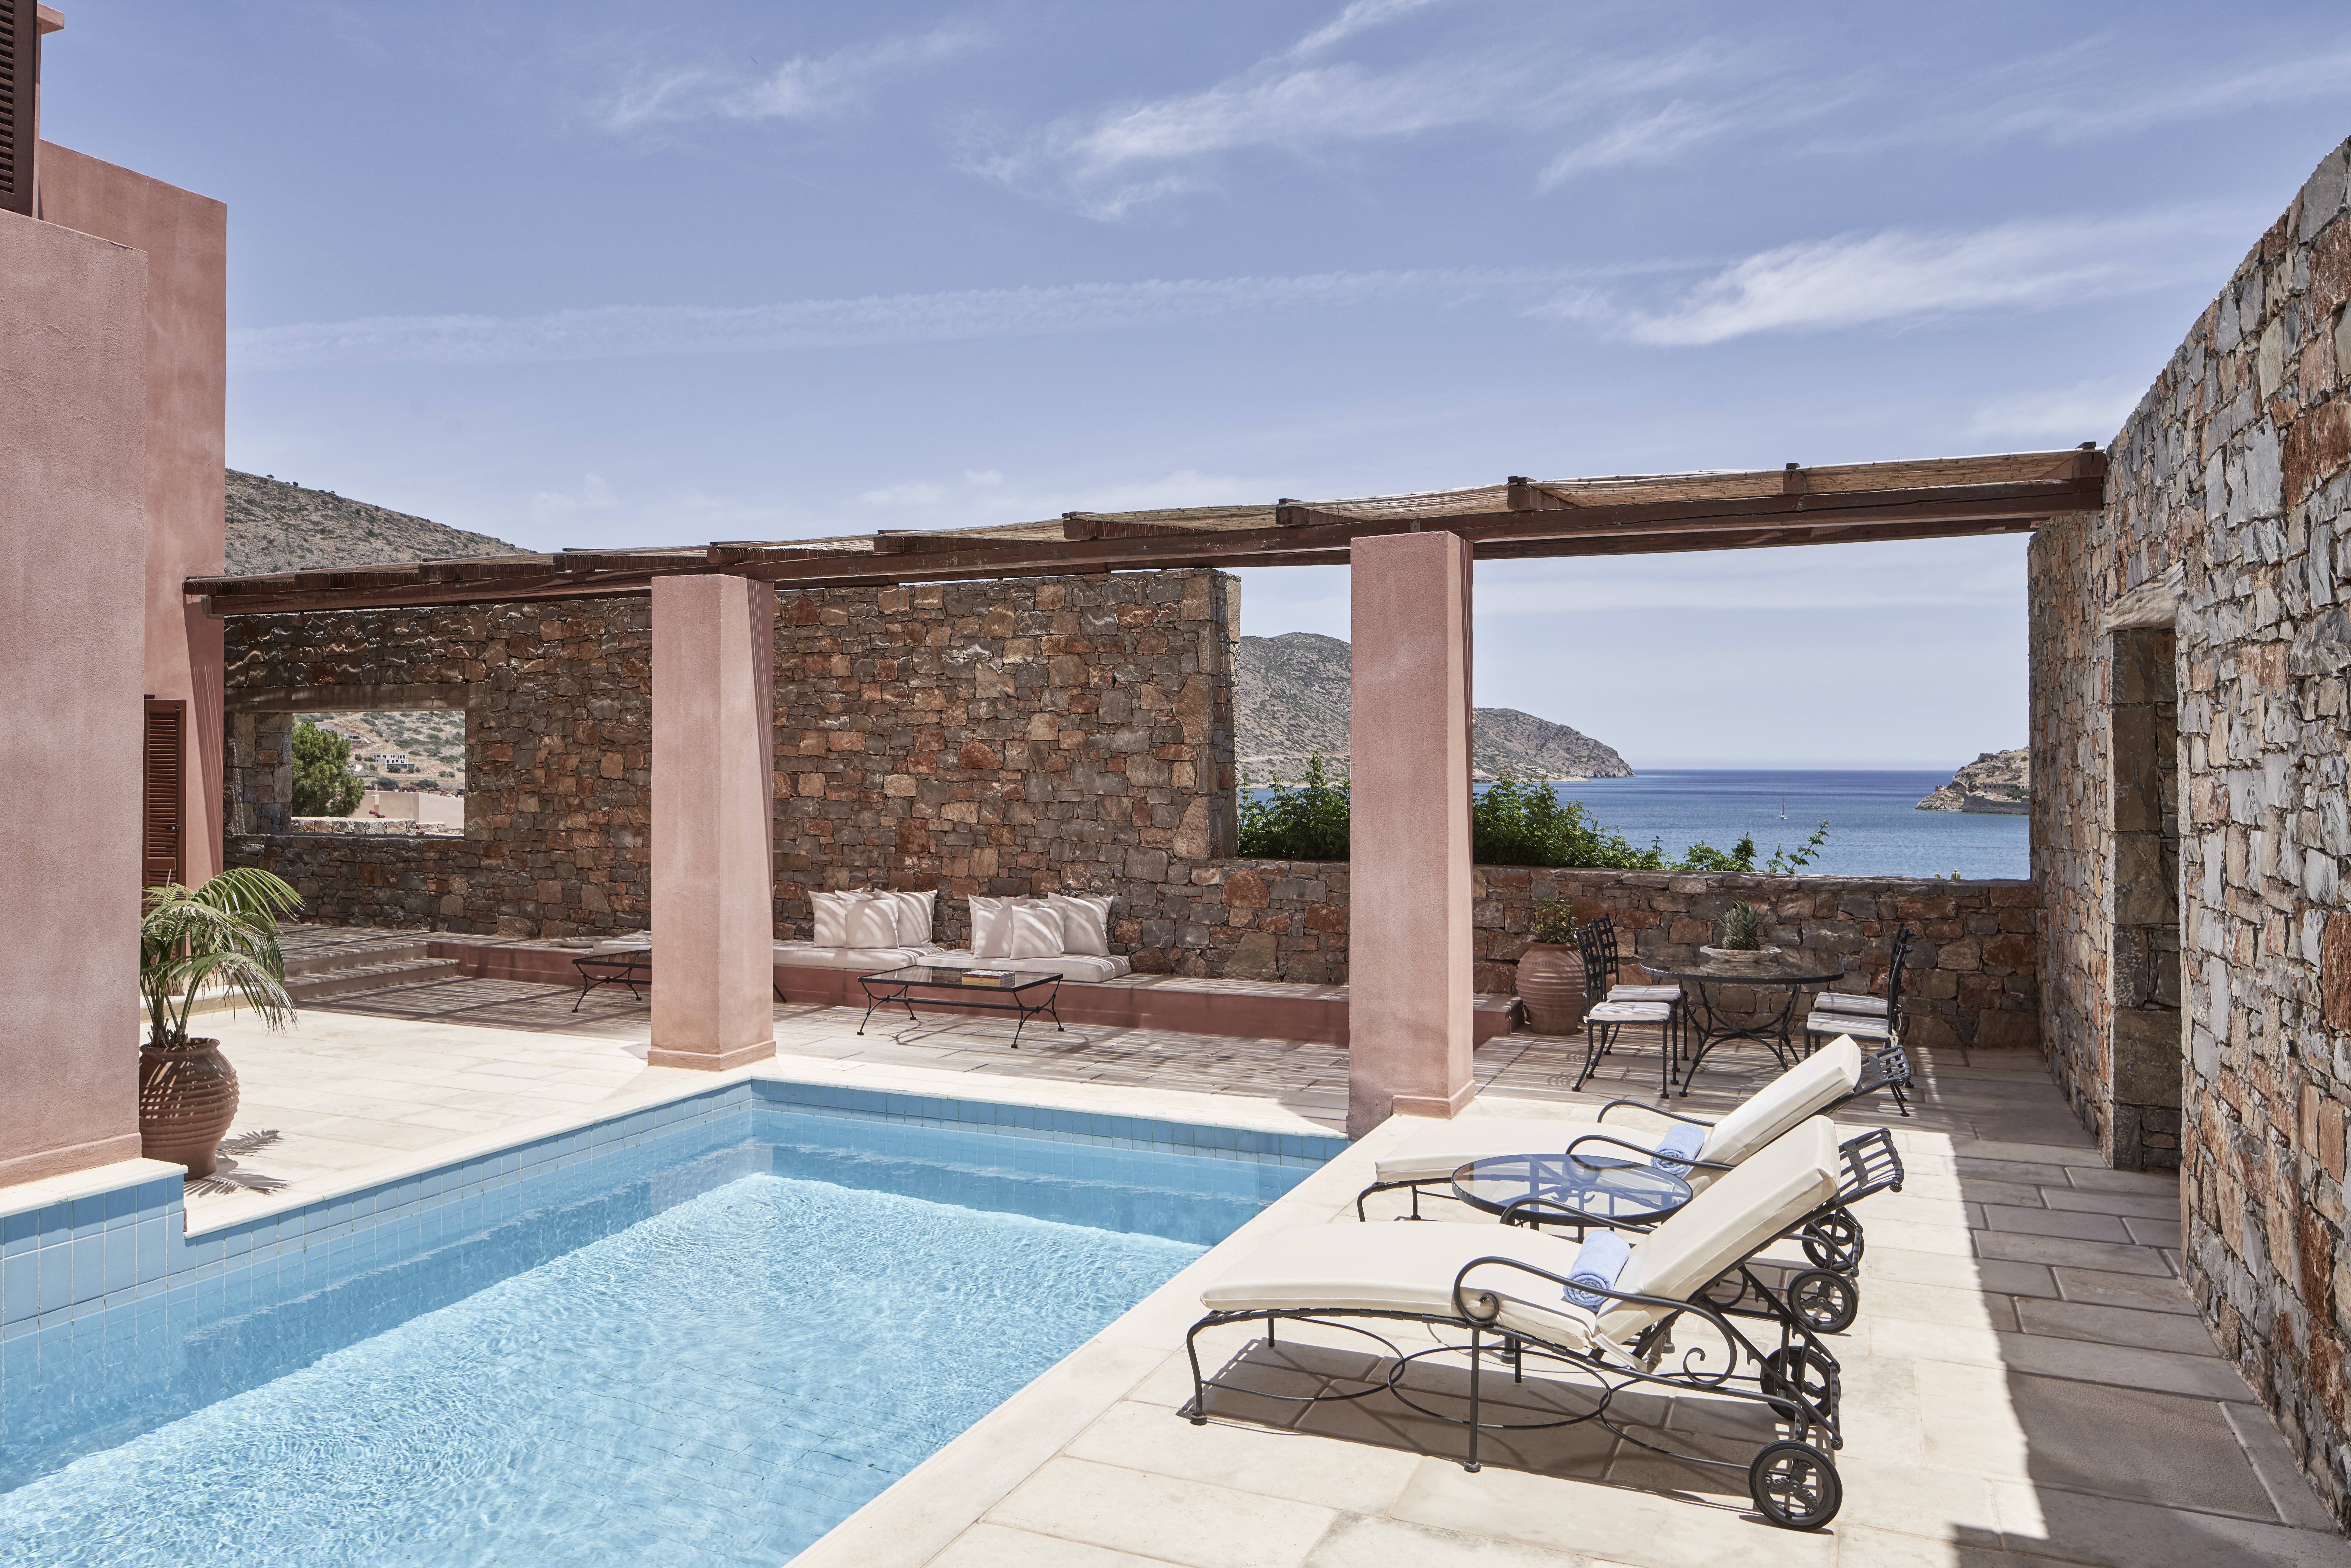 Private 2 bedroom villa with astounding views and access to resort facilities